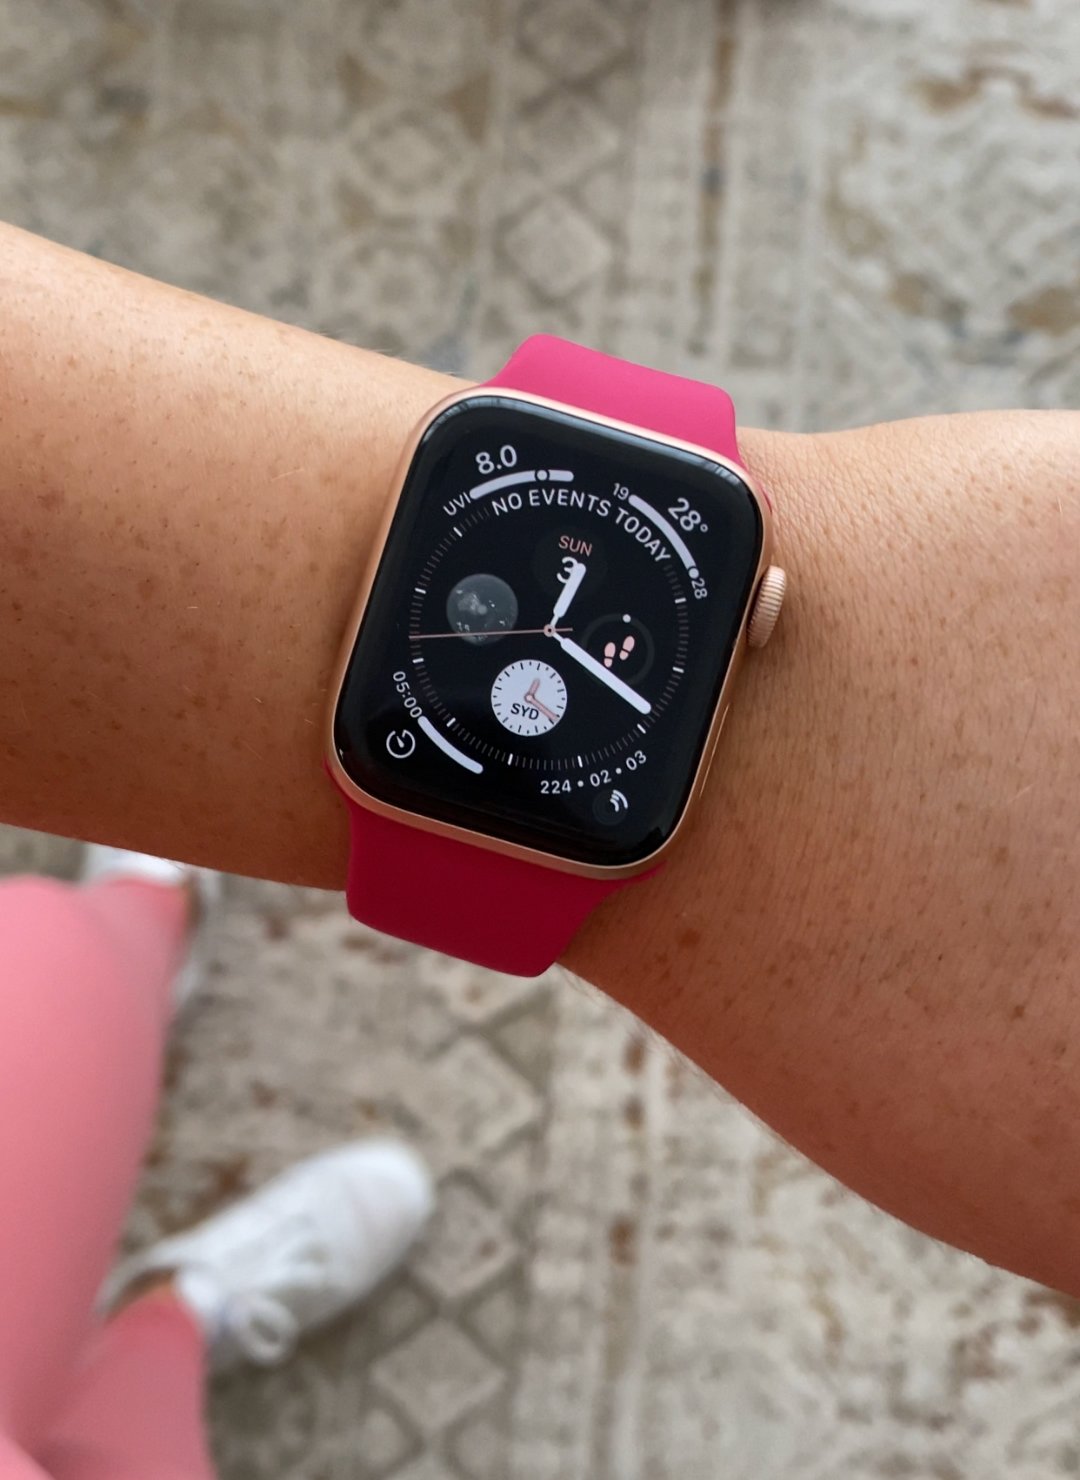 ALK Classic Silicone Band for Apple Watch in Pomegranate - Alk Designs